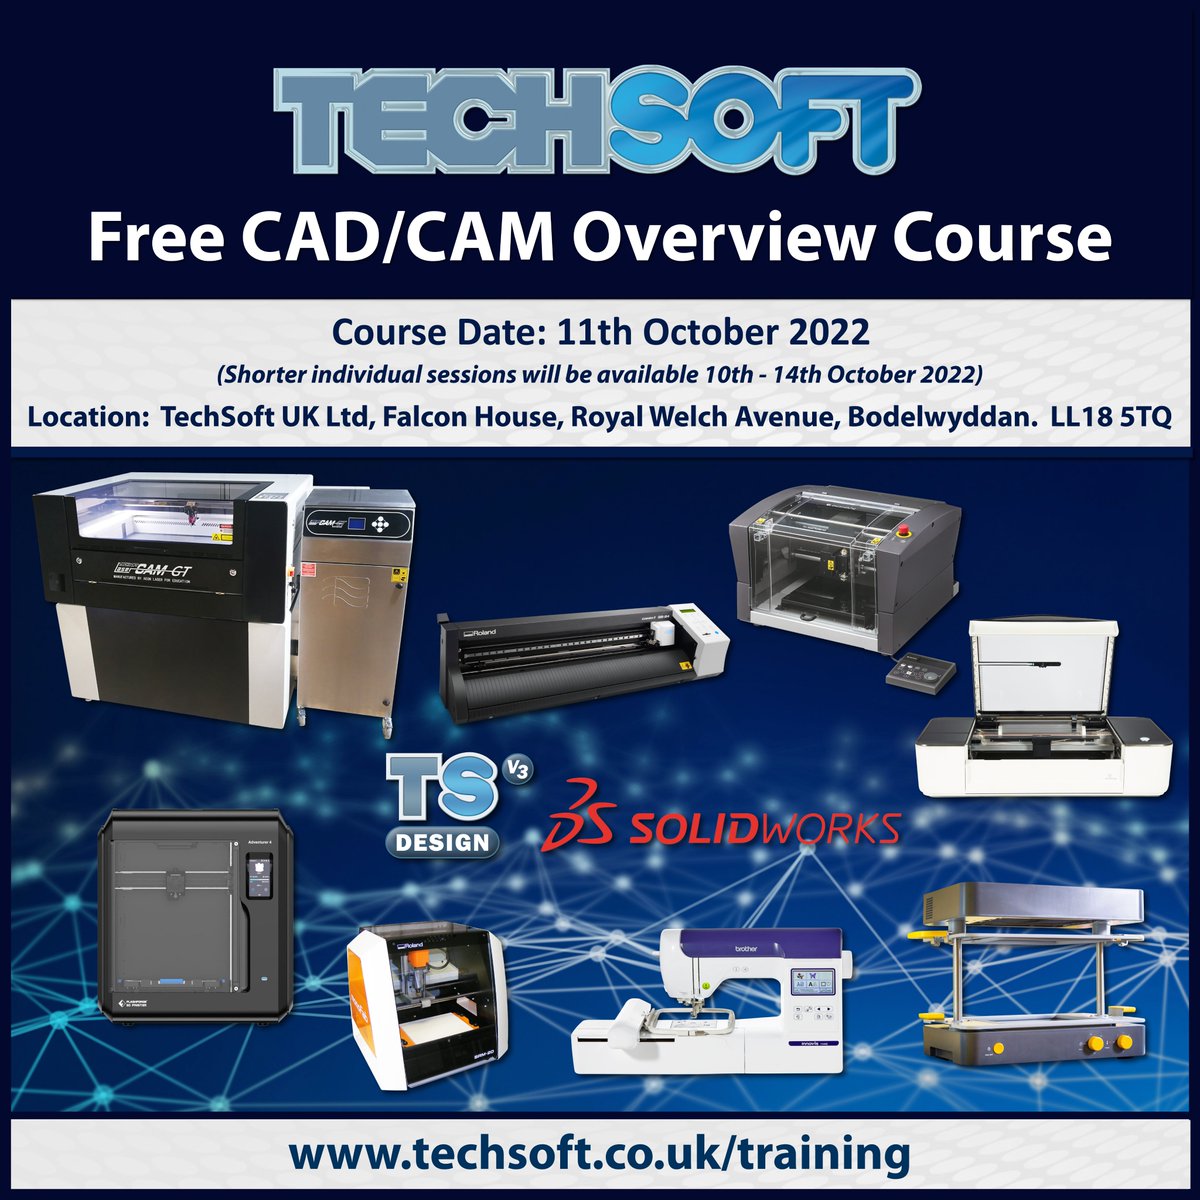 TechSoft will be hosting a free CAD/CAM overview course on the 14th October in our showroom in North Wales. The day will include demonstrations of our latest equipment and various case studies and project samples. You can book a place on our website at techsoft.co.uk/Training